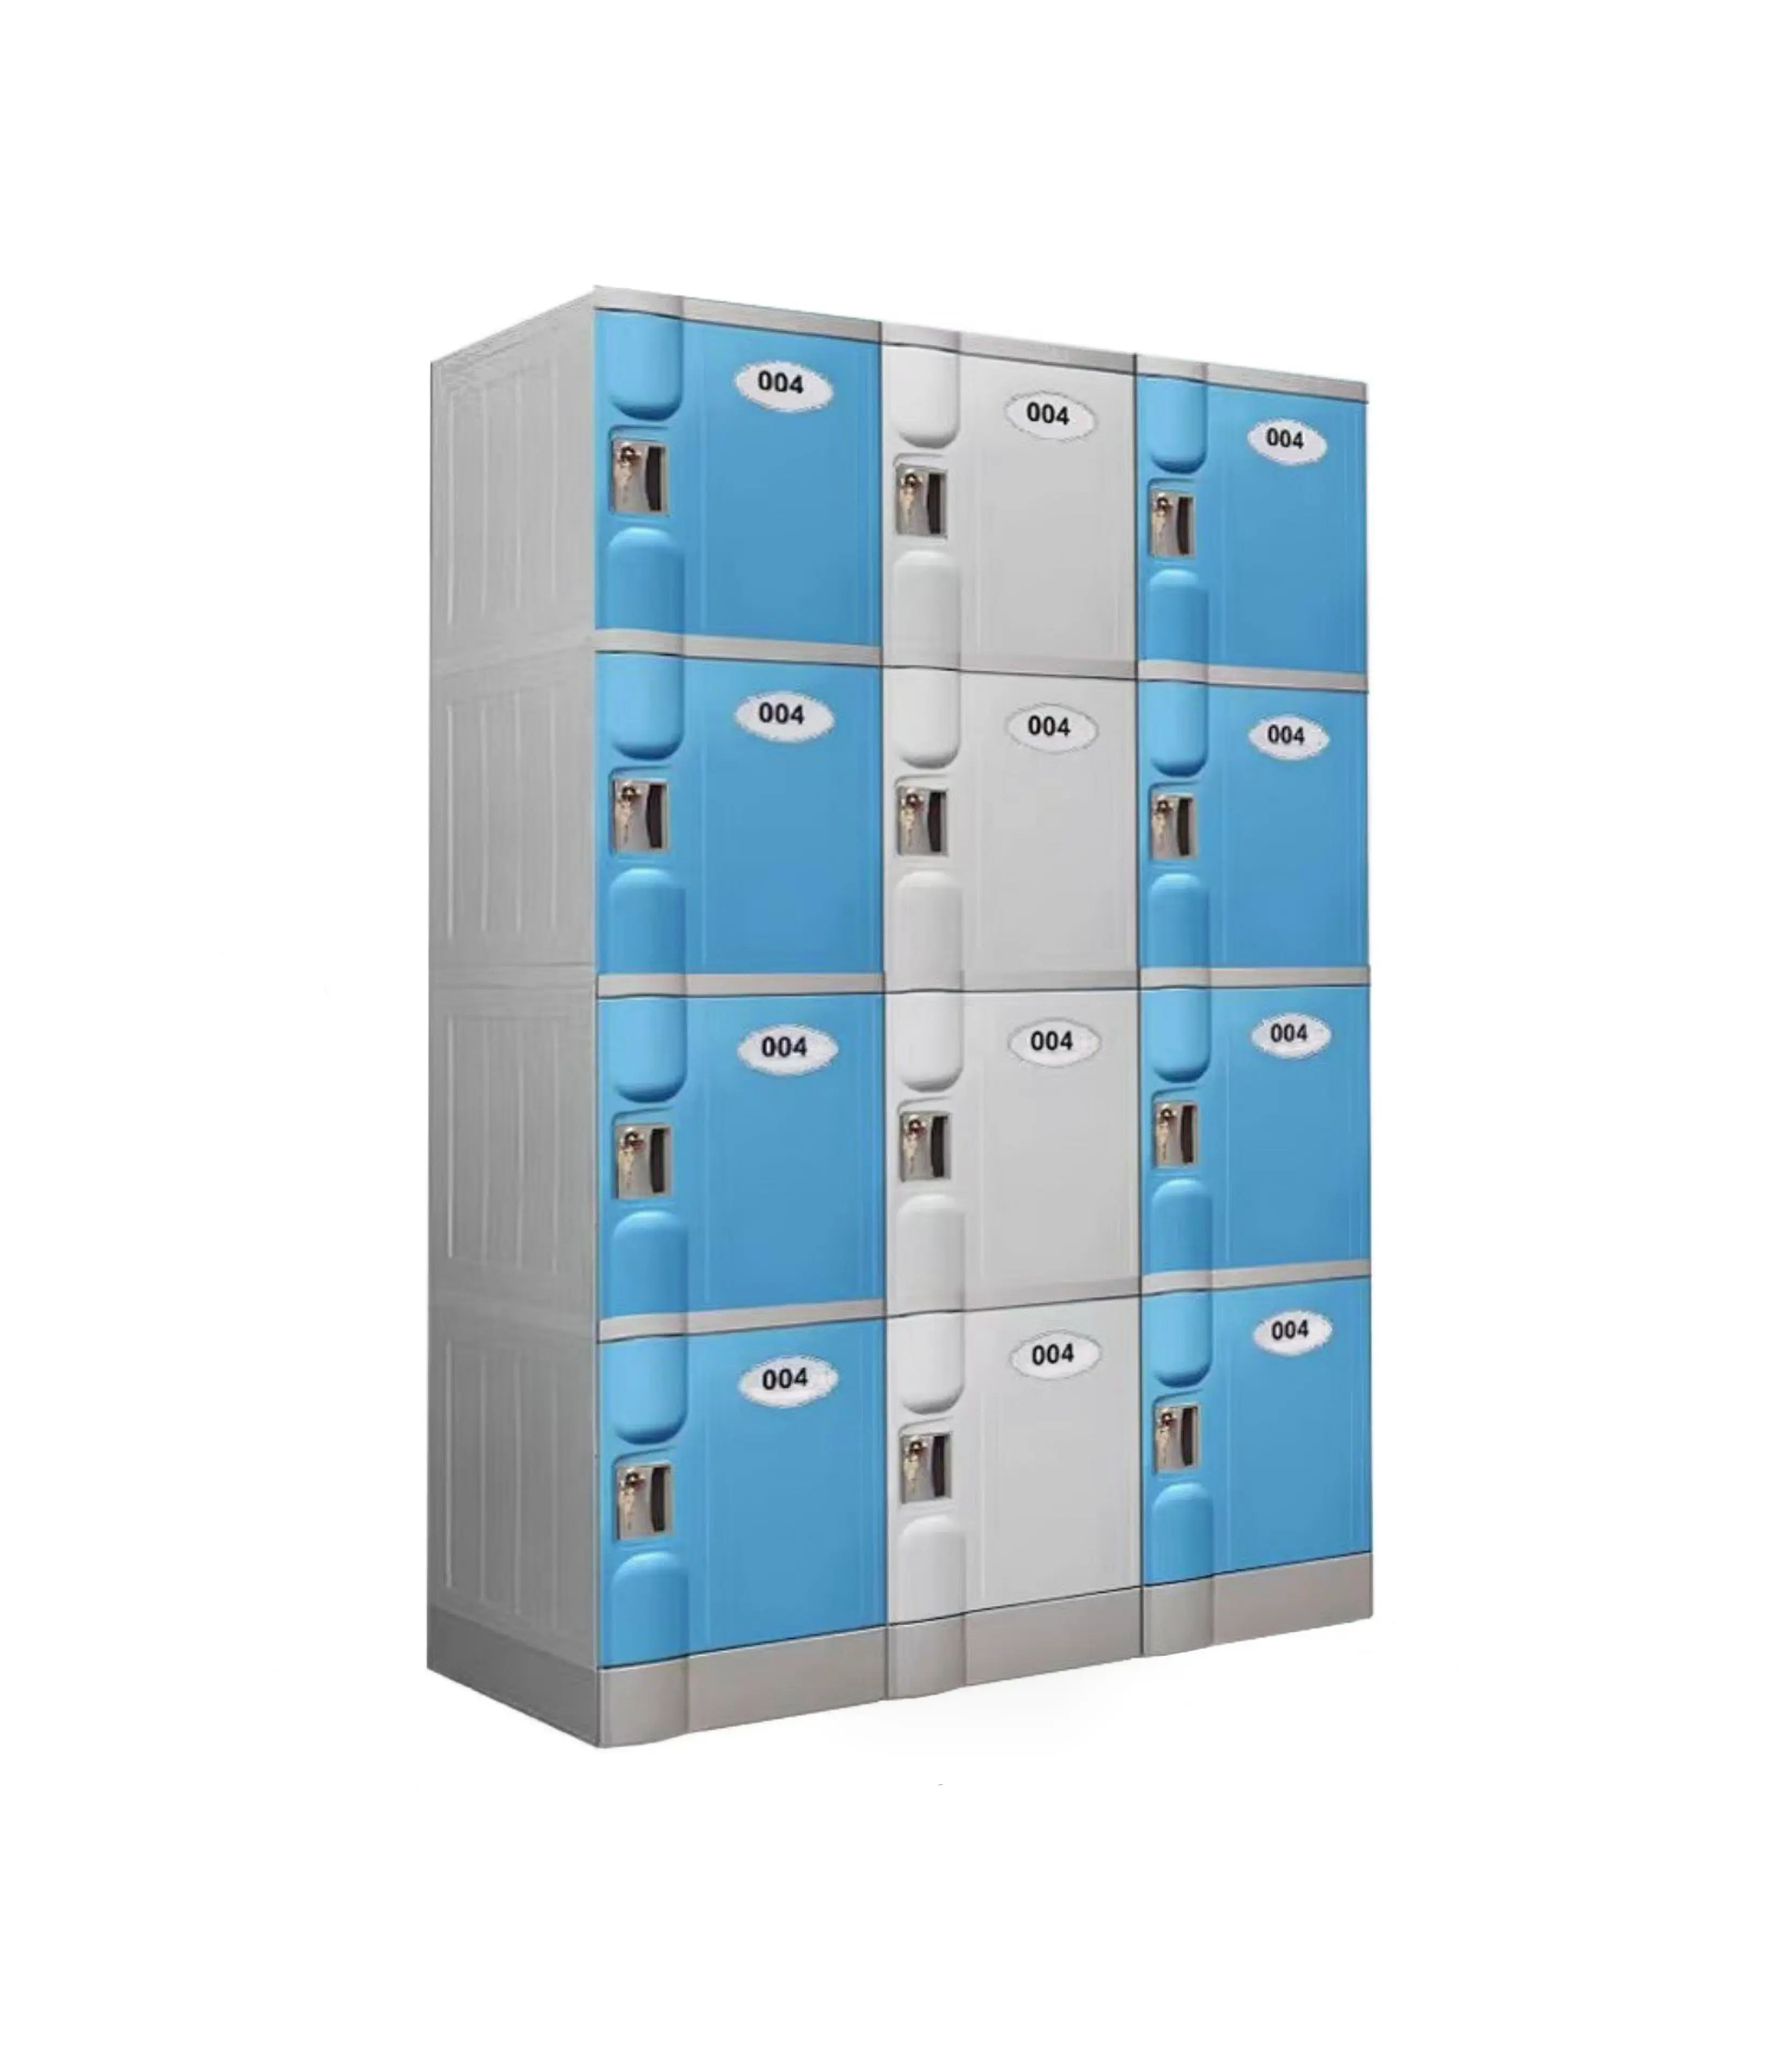 Public Digital Safe ABS Plastic Automatic Differential Smart Lockers System Cabinet for Swimming Pool